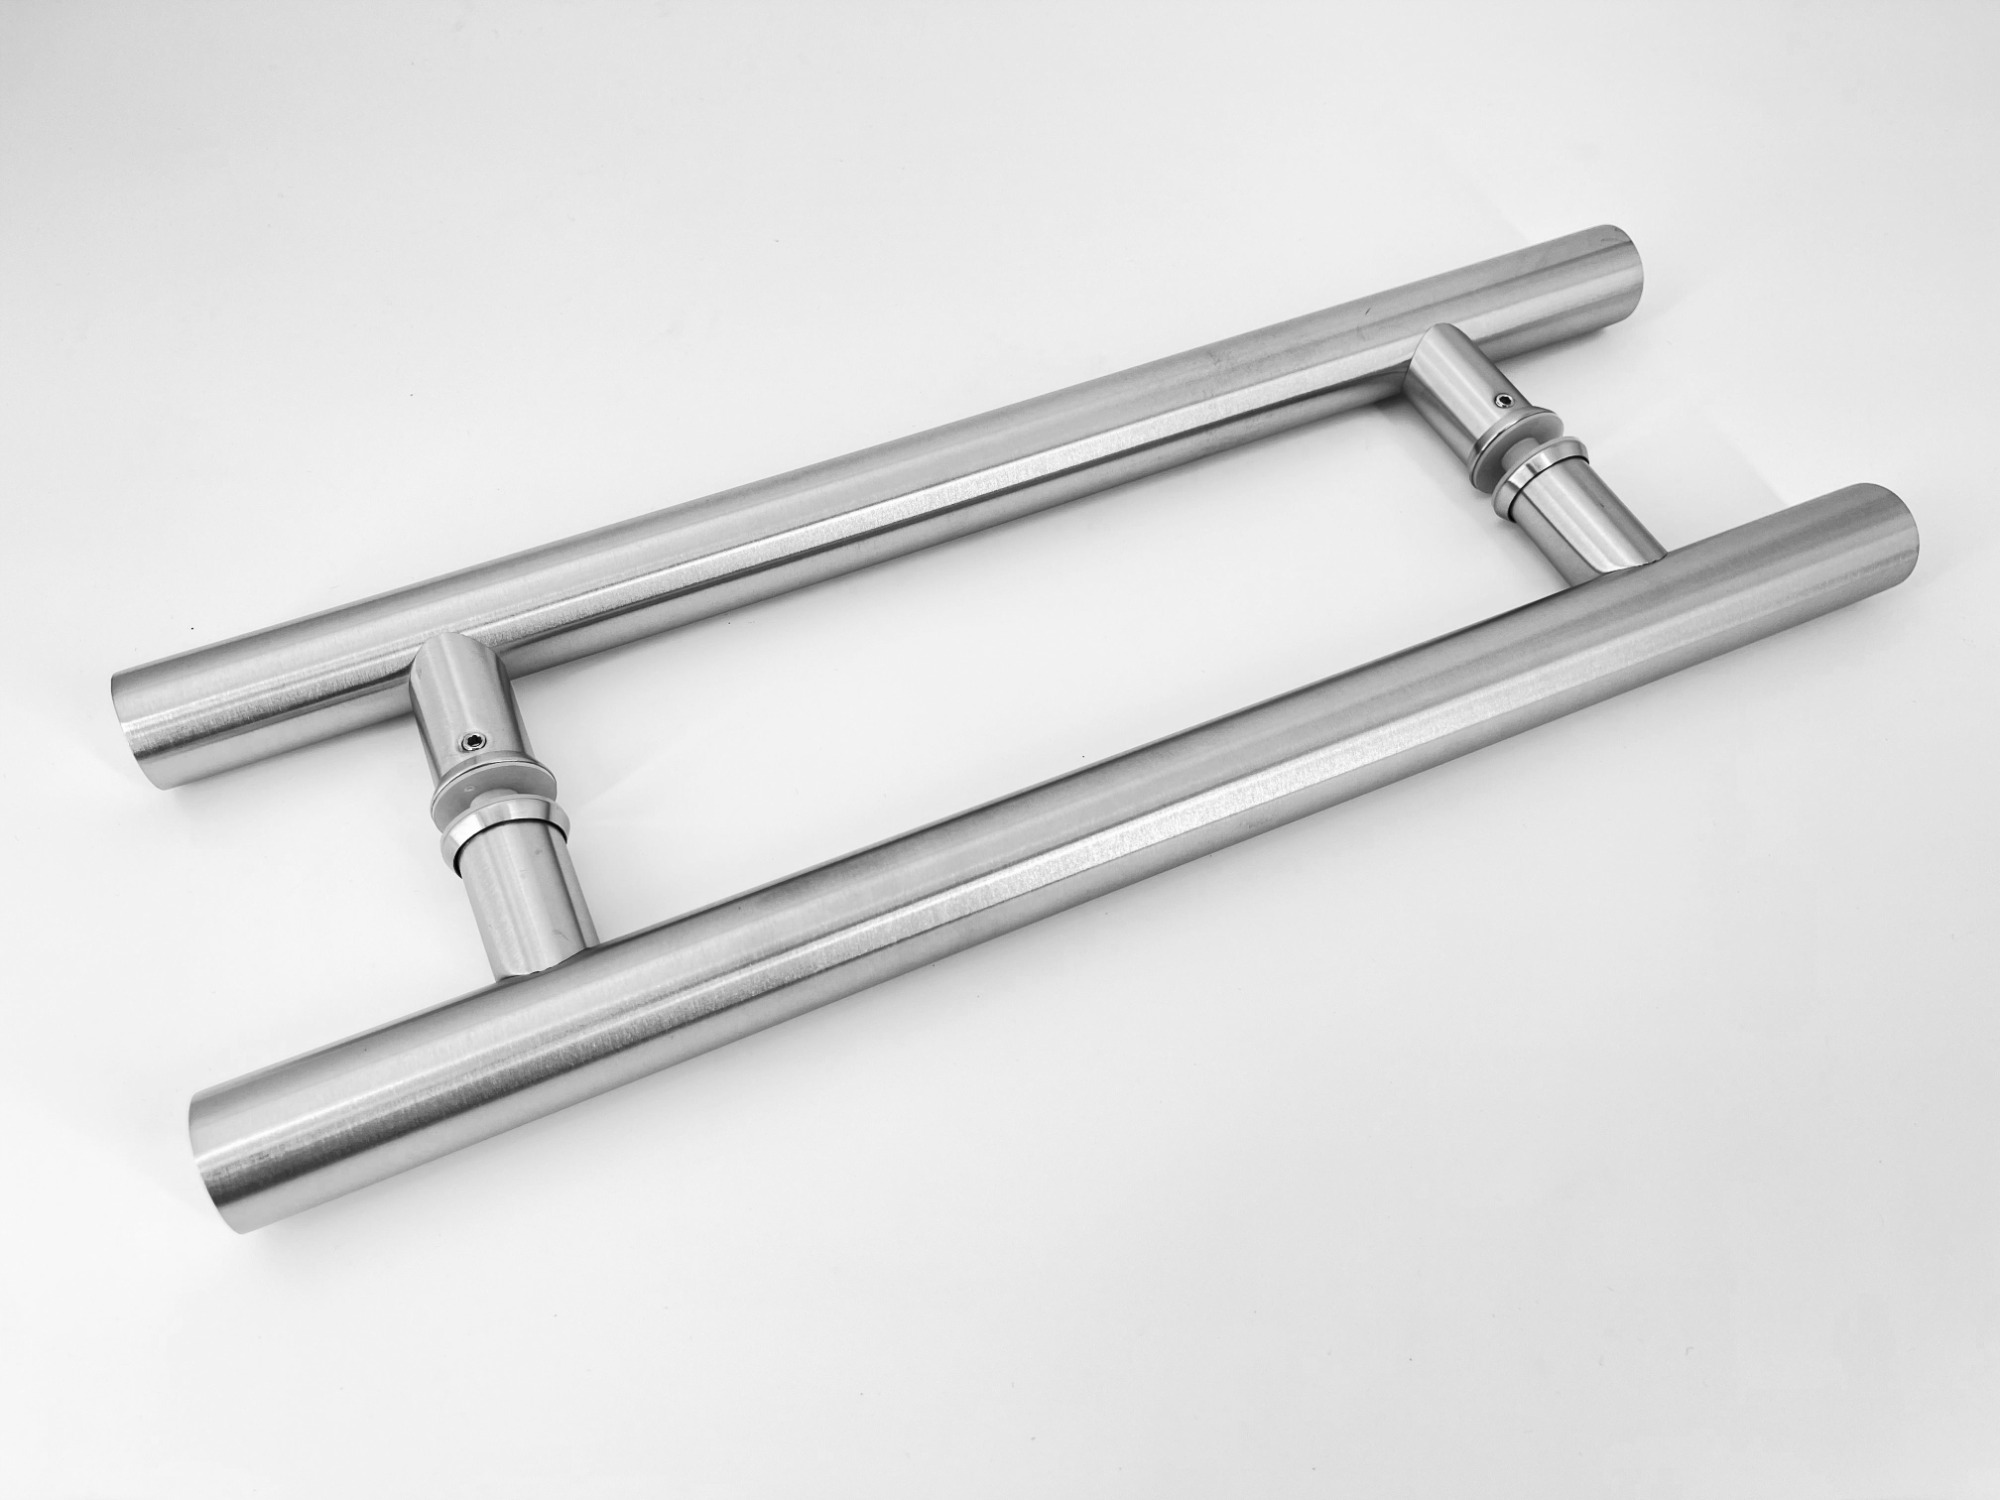 Benefits of stainless steel handle